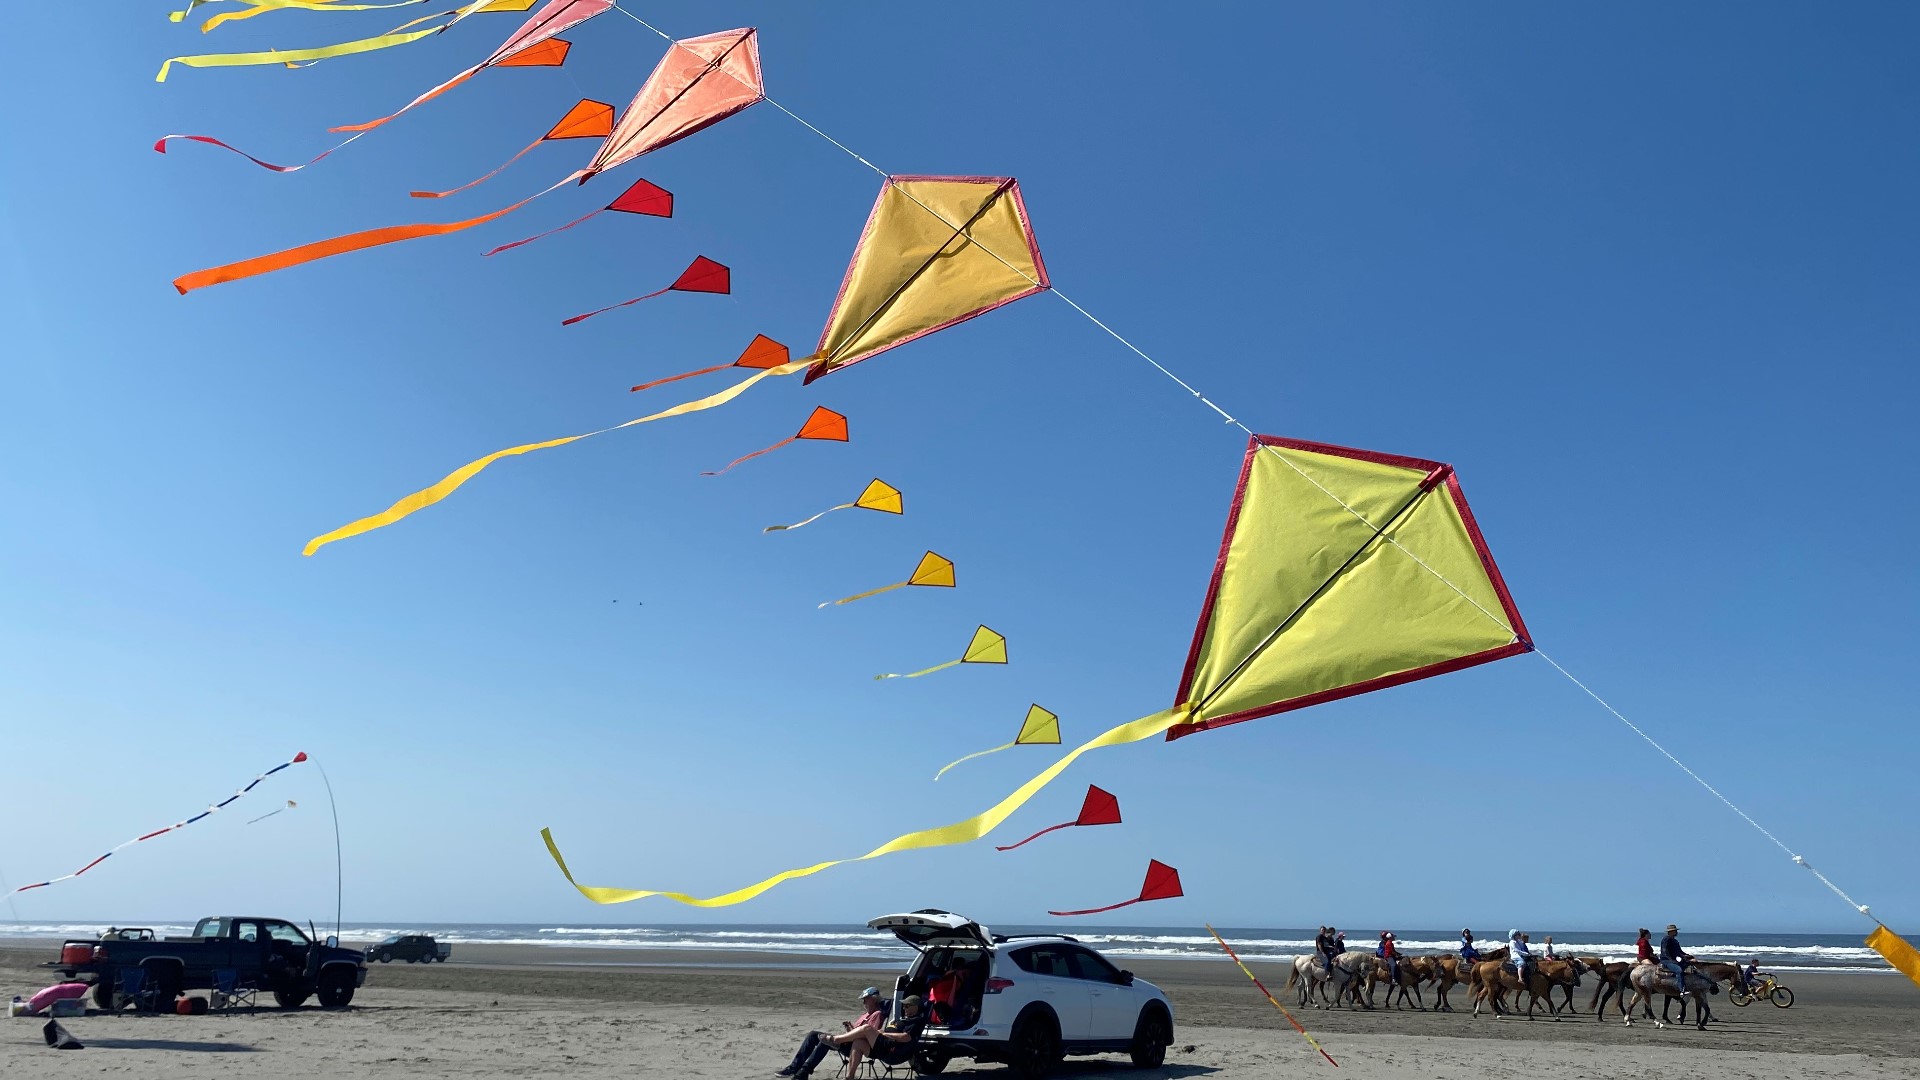 Kites are for everyone and wind is free says Ocean Shores Kites owner. Sponsored by Grays Harbor Tourism.